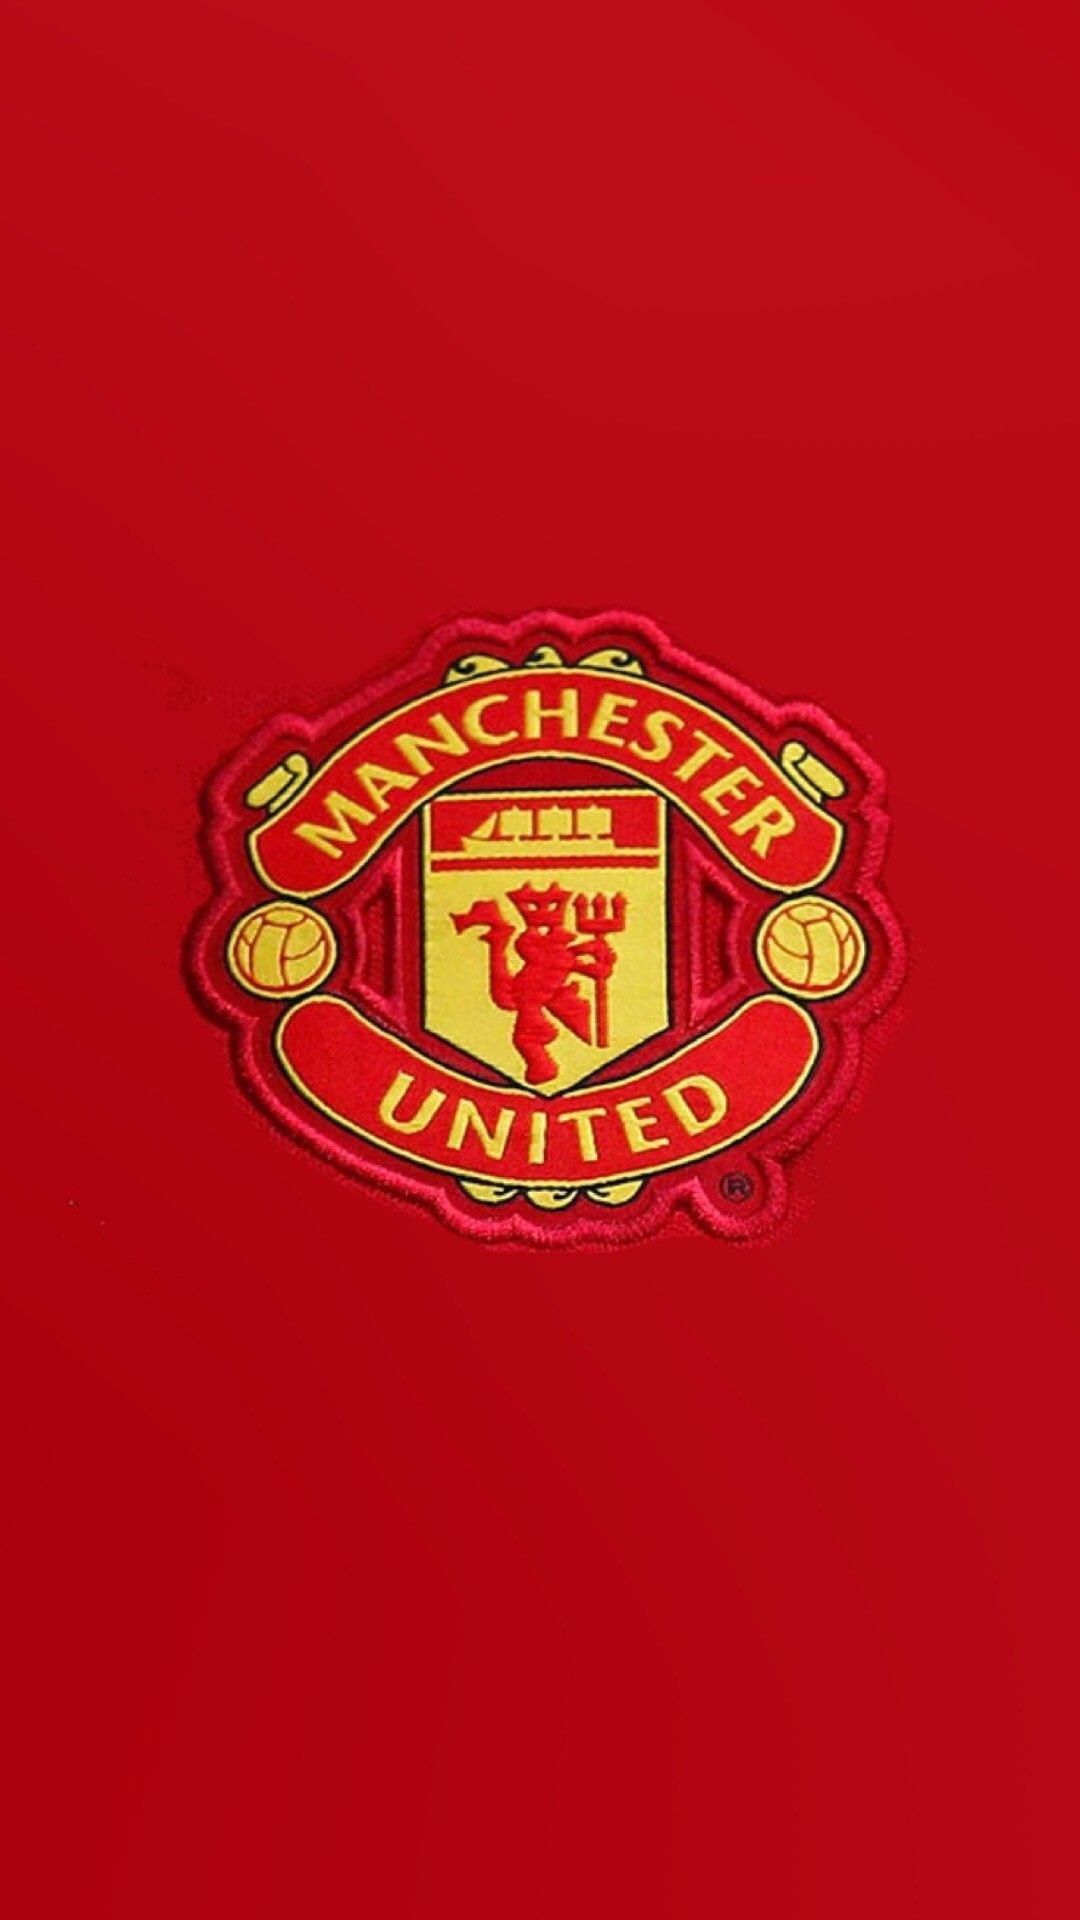 Retro Manchester United Wallpapers - Wallpaper Cave